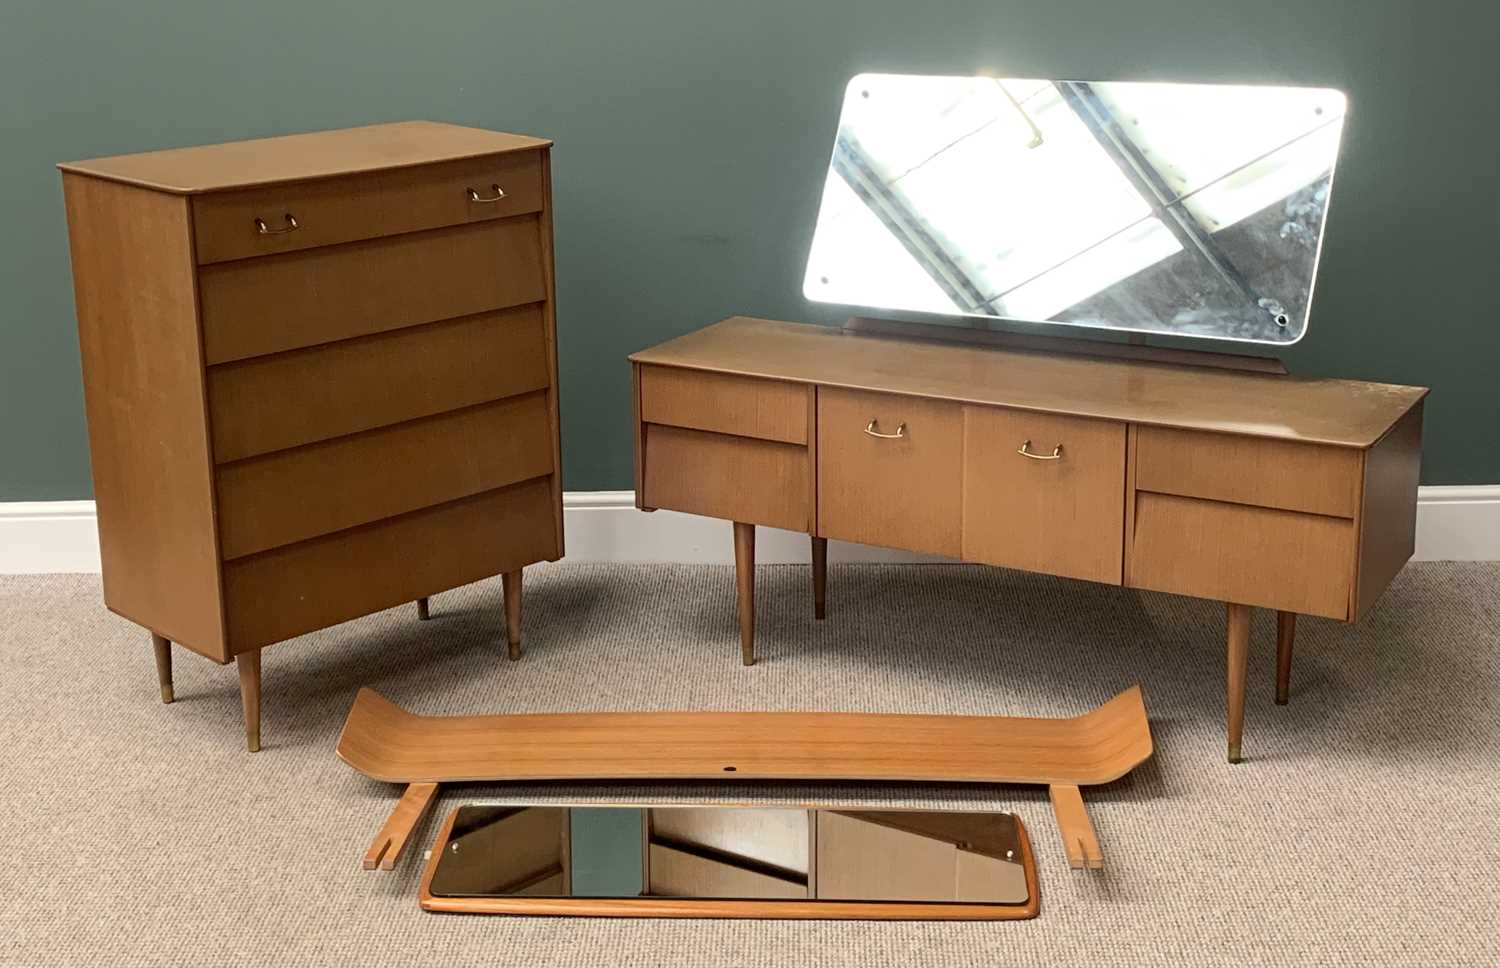 AVALON YATTON MID-CENTURY BEDROOM FURNITURE (2) to include a five drawer chest, 103cms H, 77cms W,